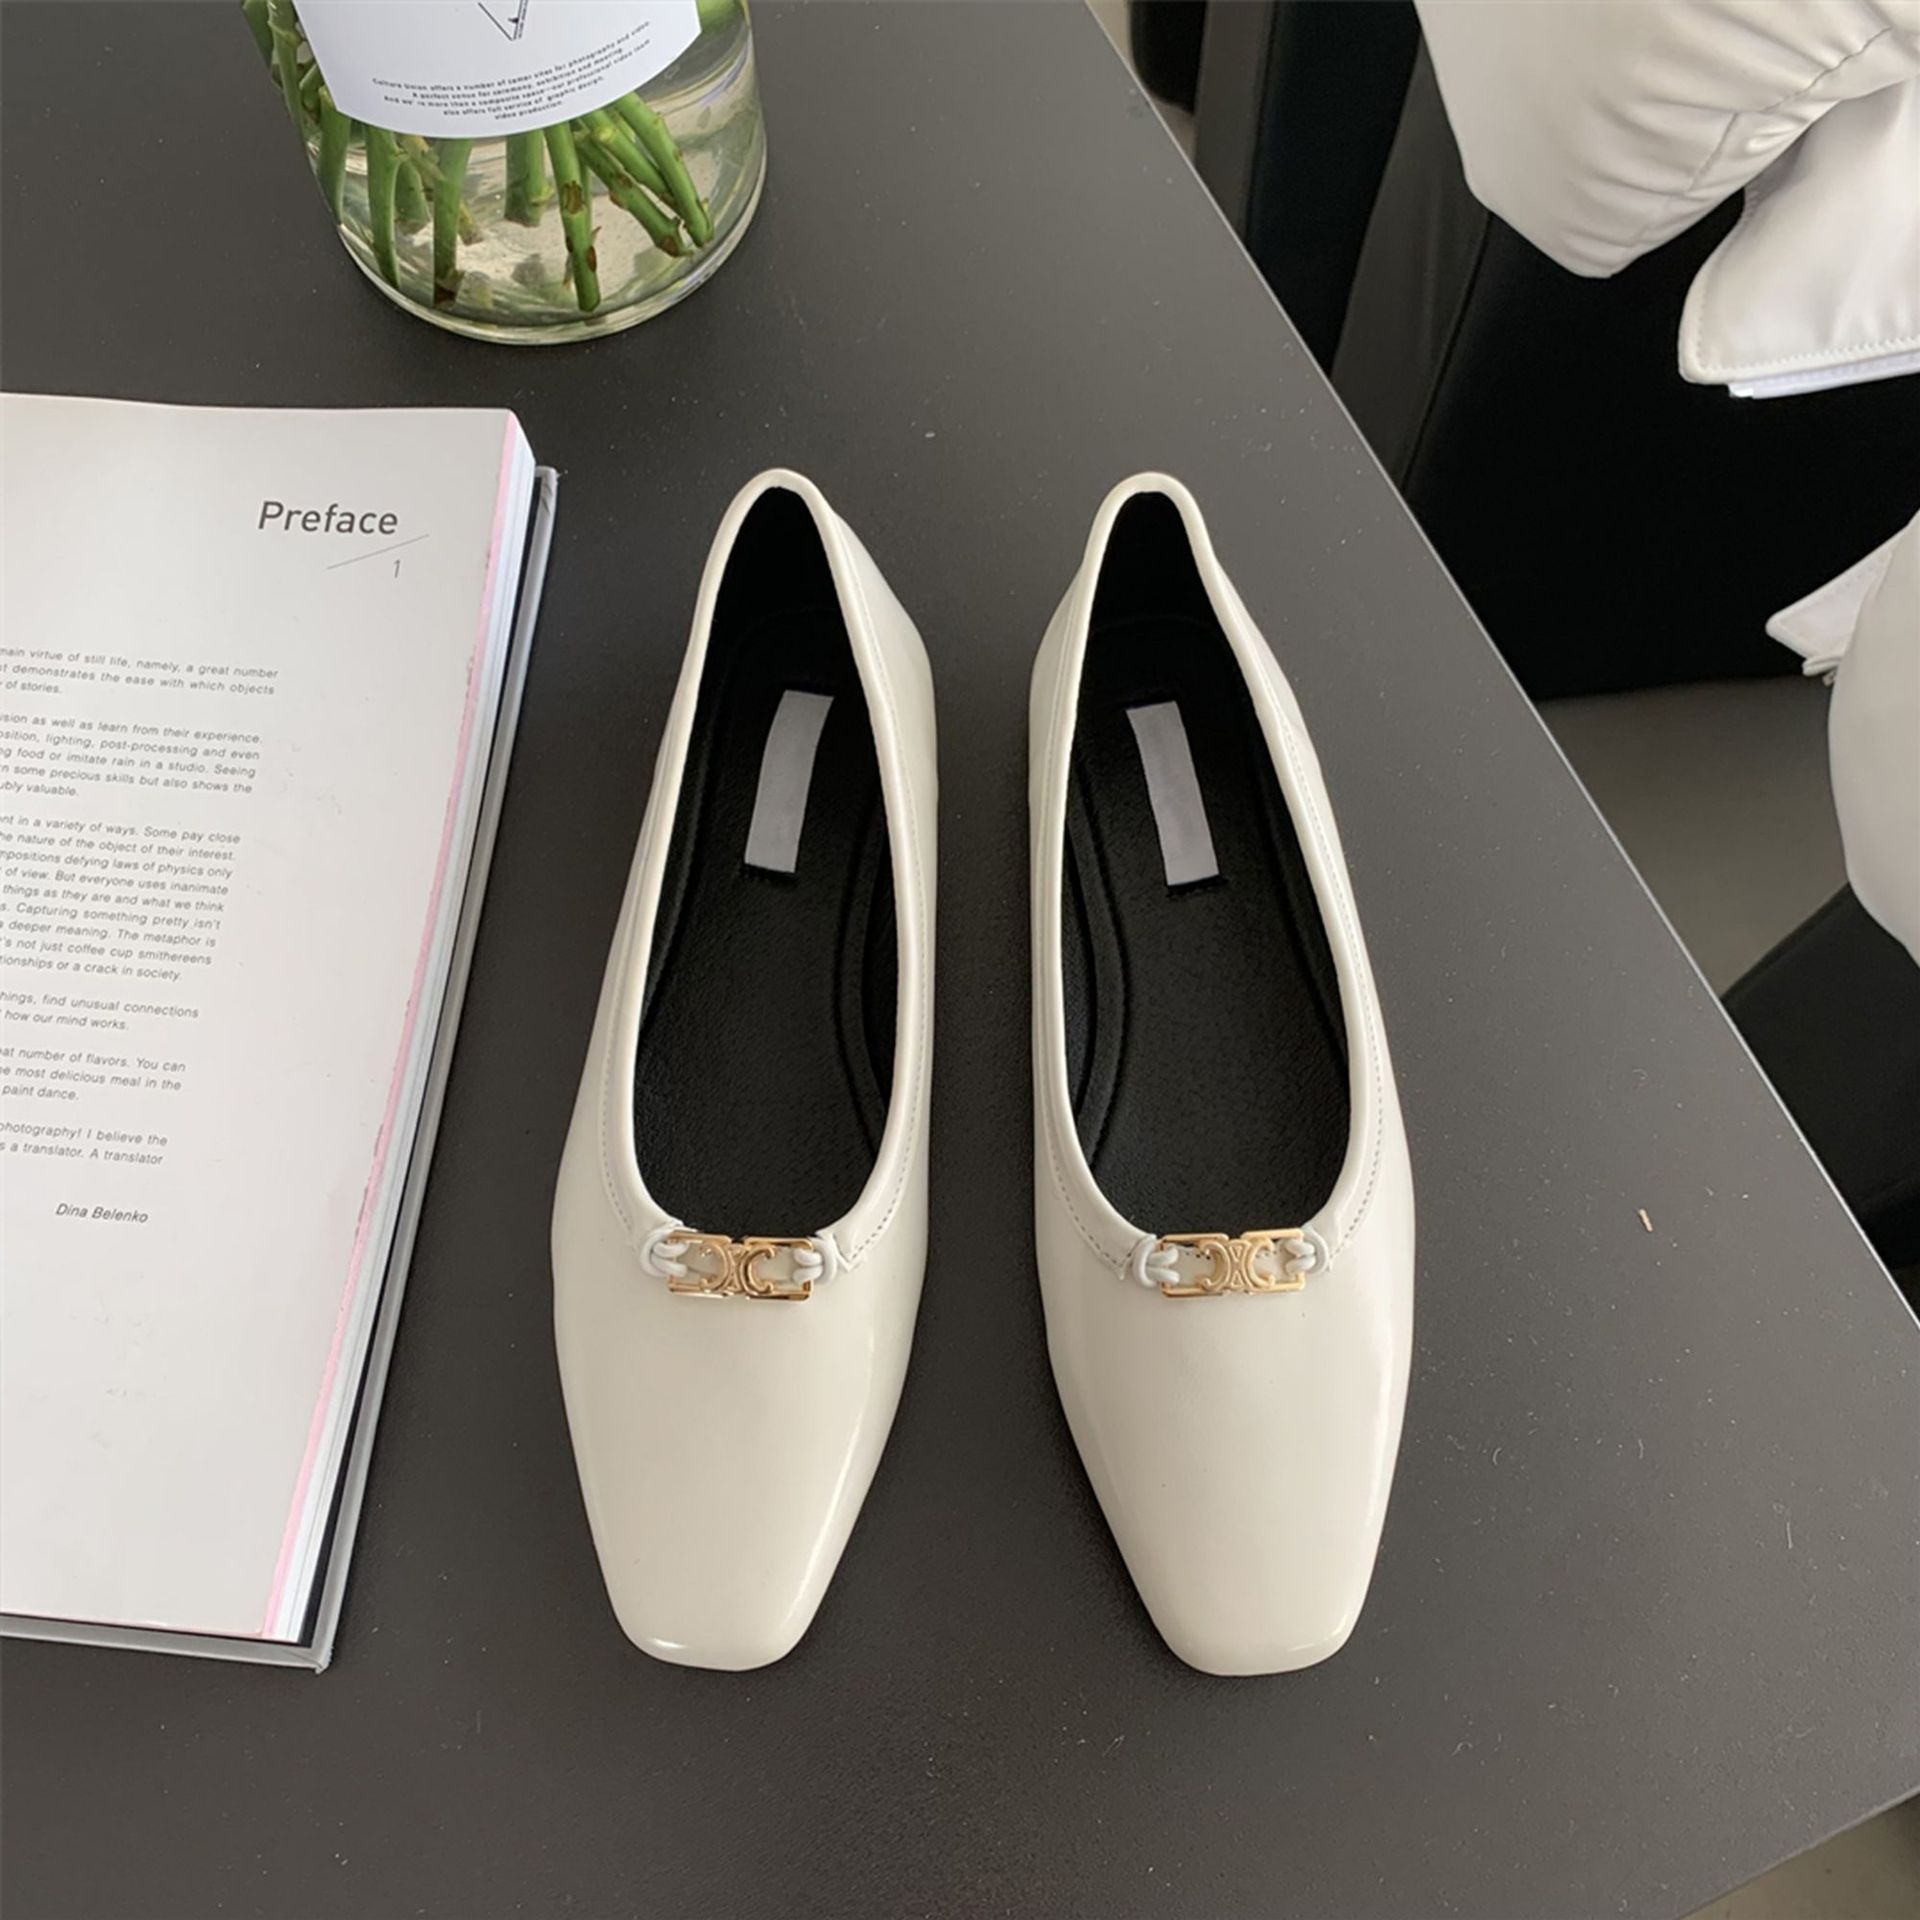 Statement-making shoes to stand out Flats Enjoy the freedom of movement with flat shoes